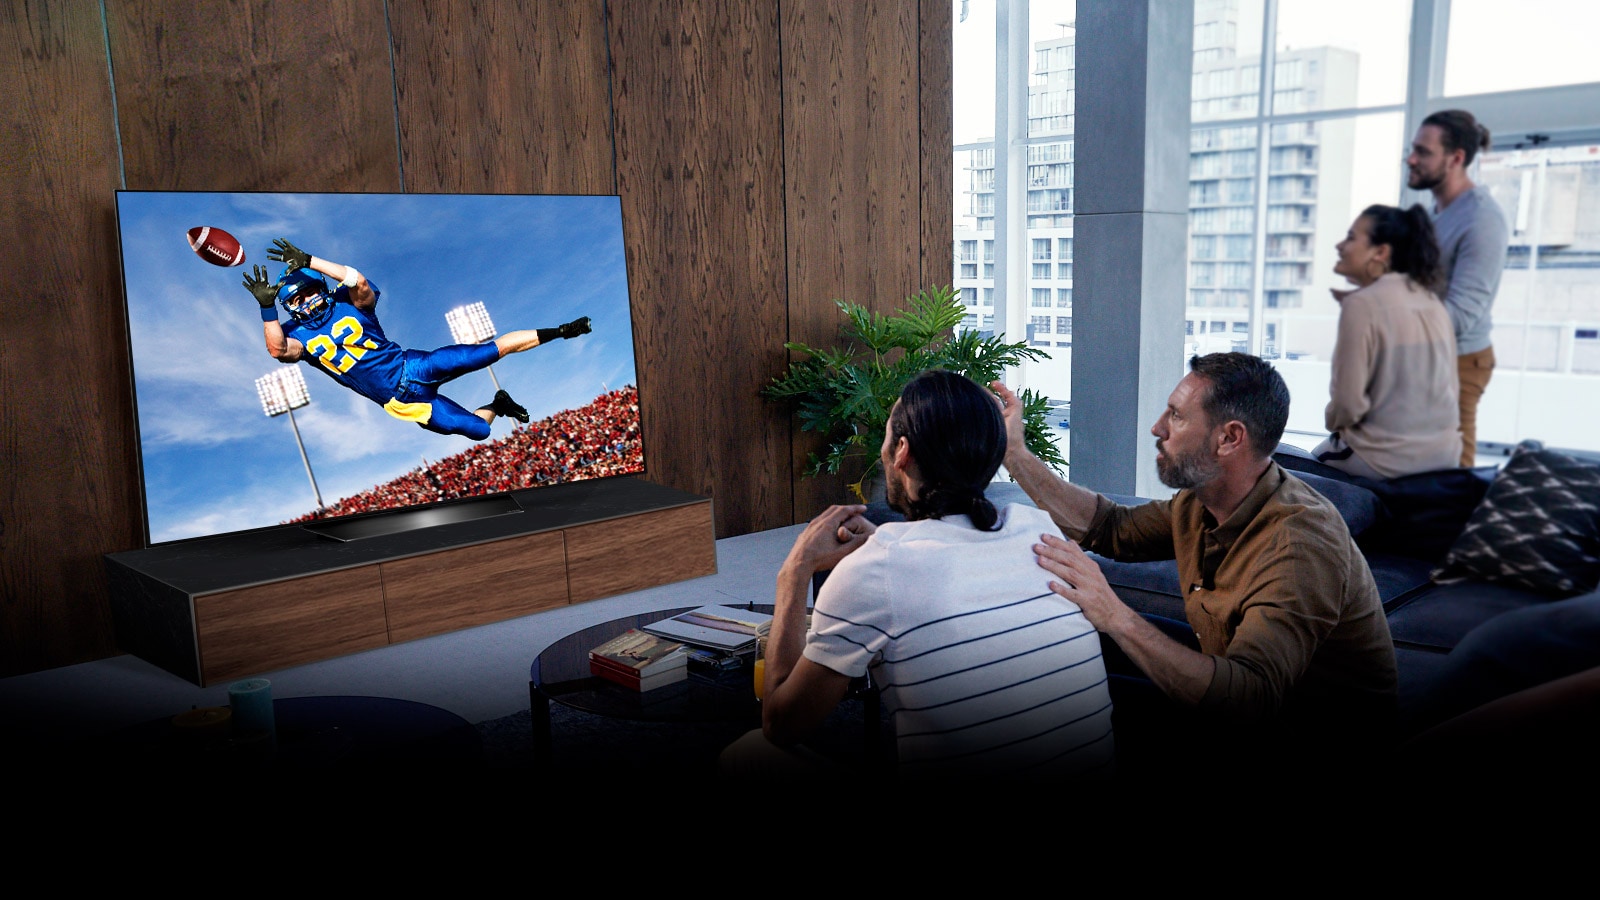 OLED TV gets you closer to the action1